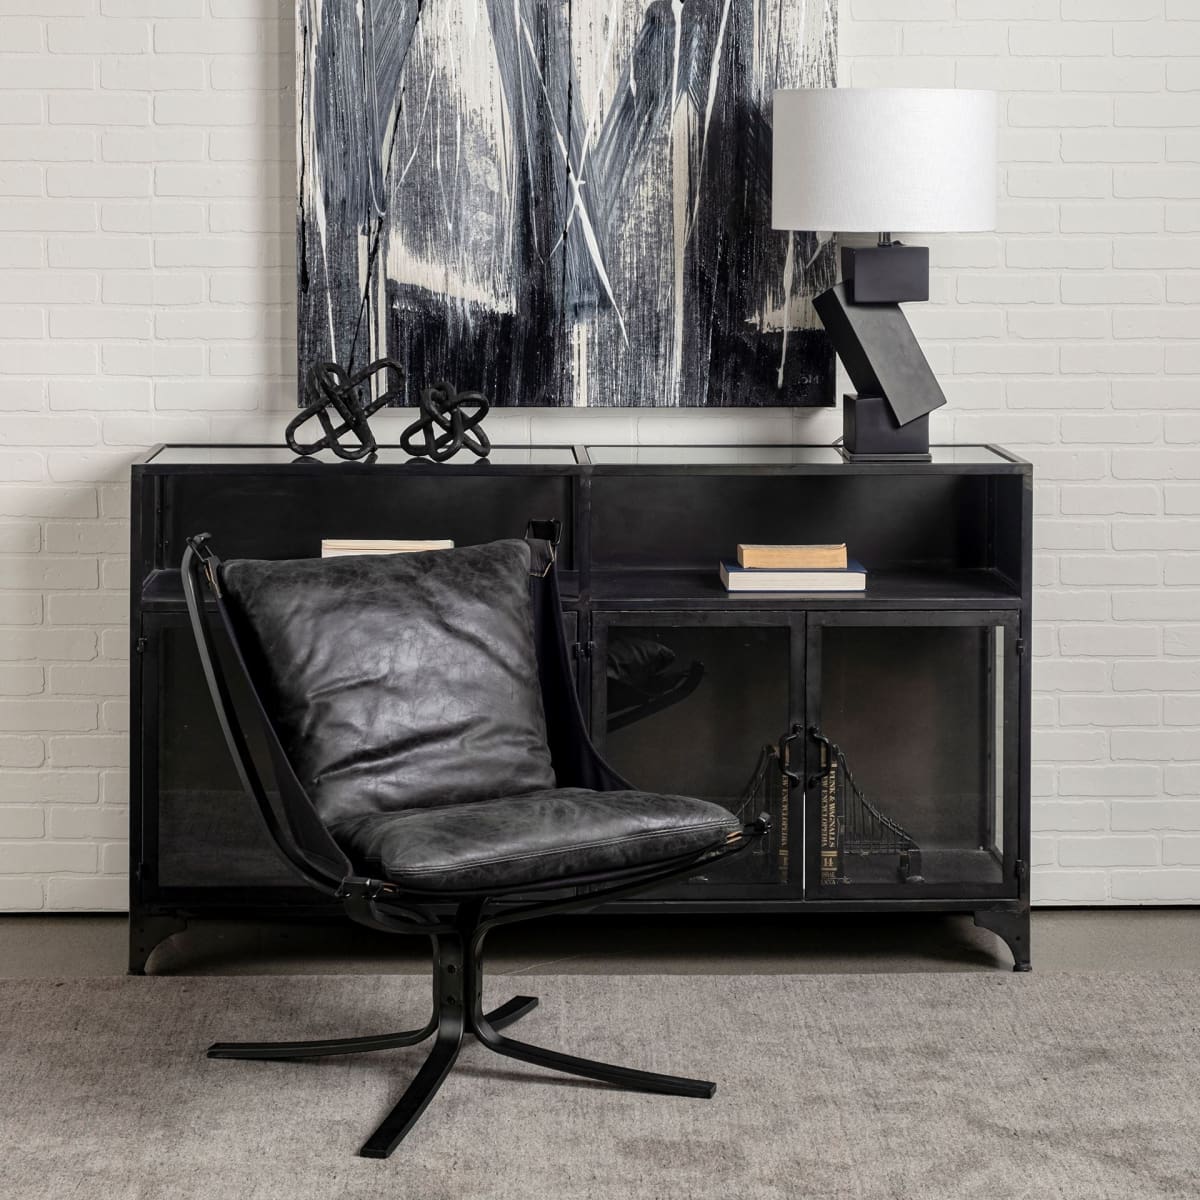 Colarado Accent Chair Black Leather | Black Iron - accent-chairs